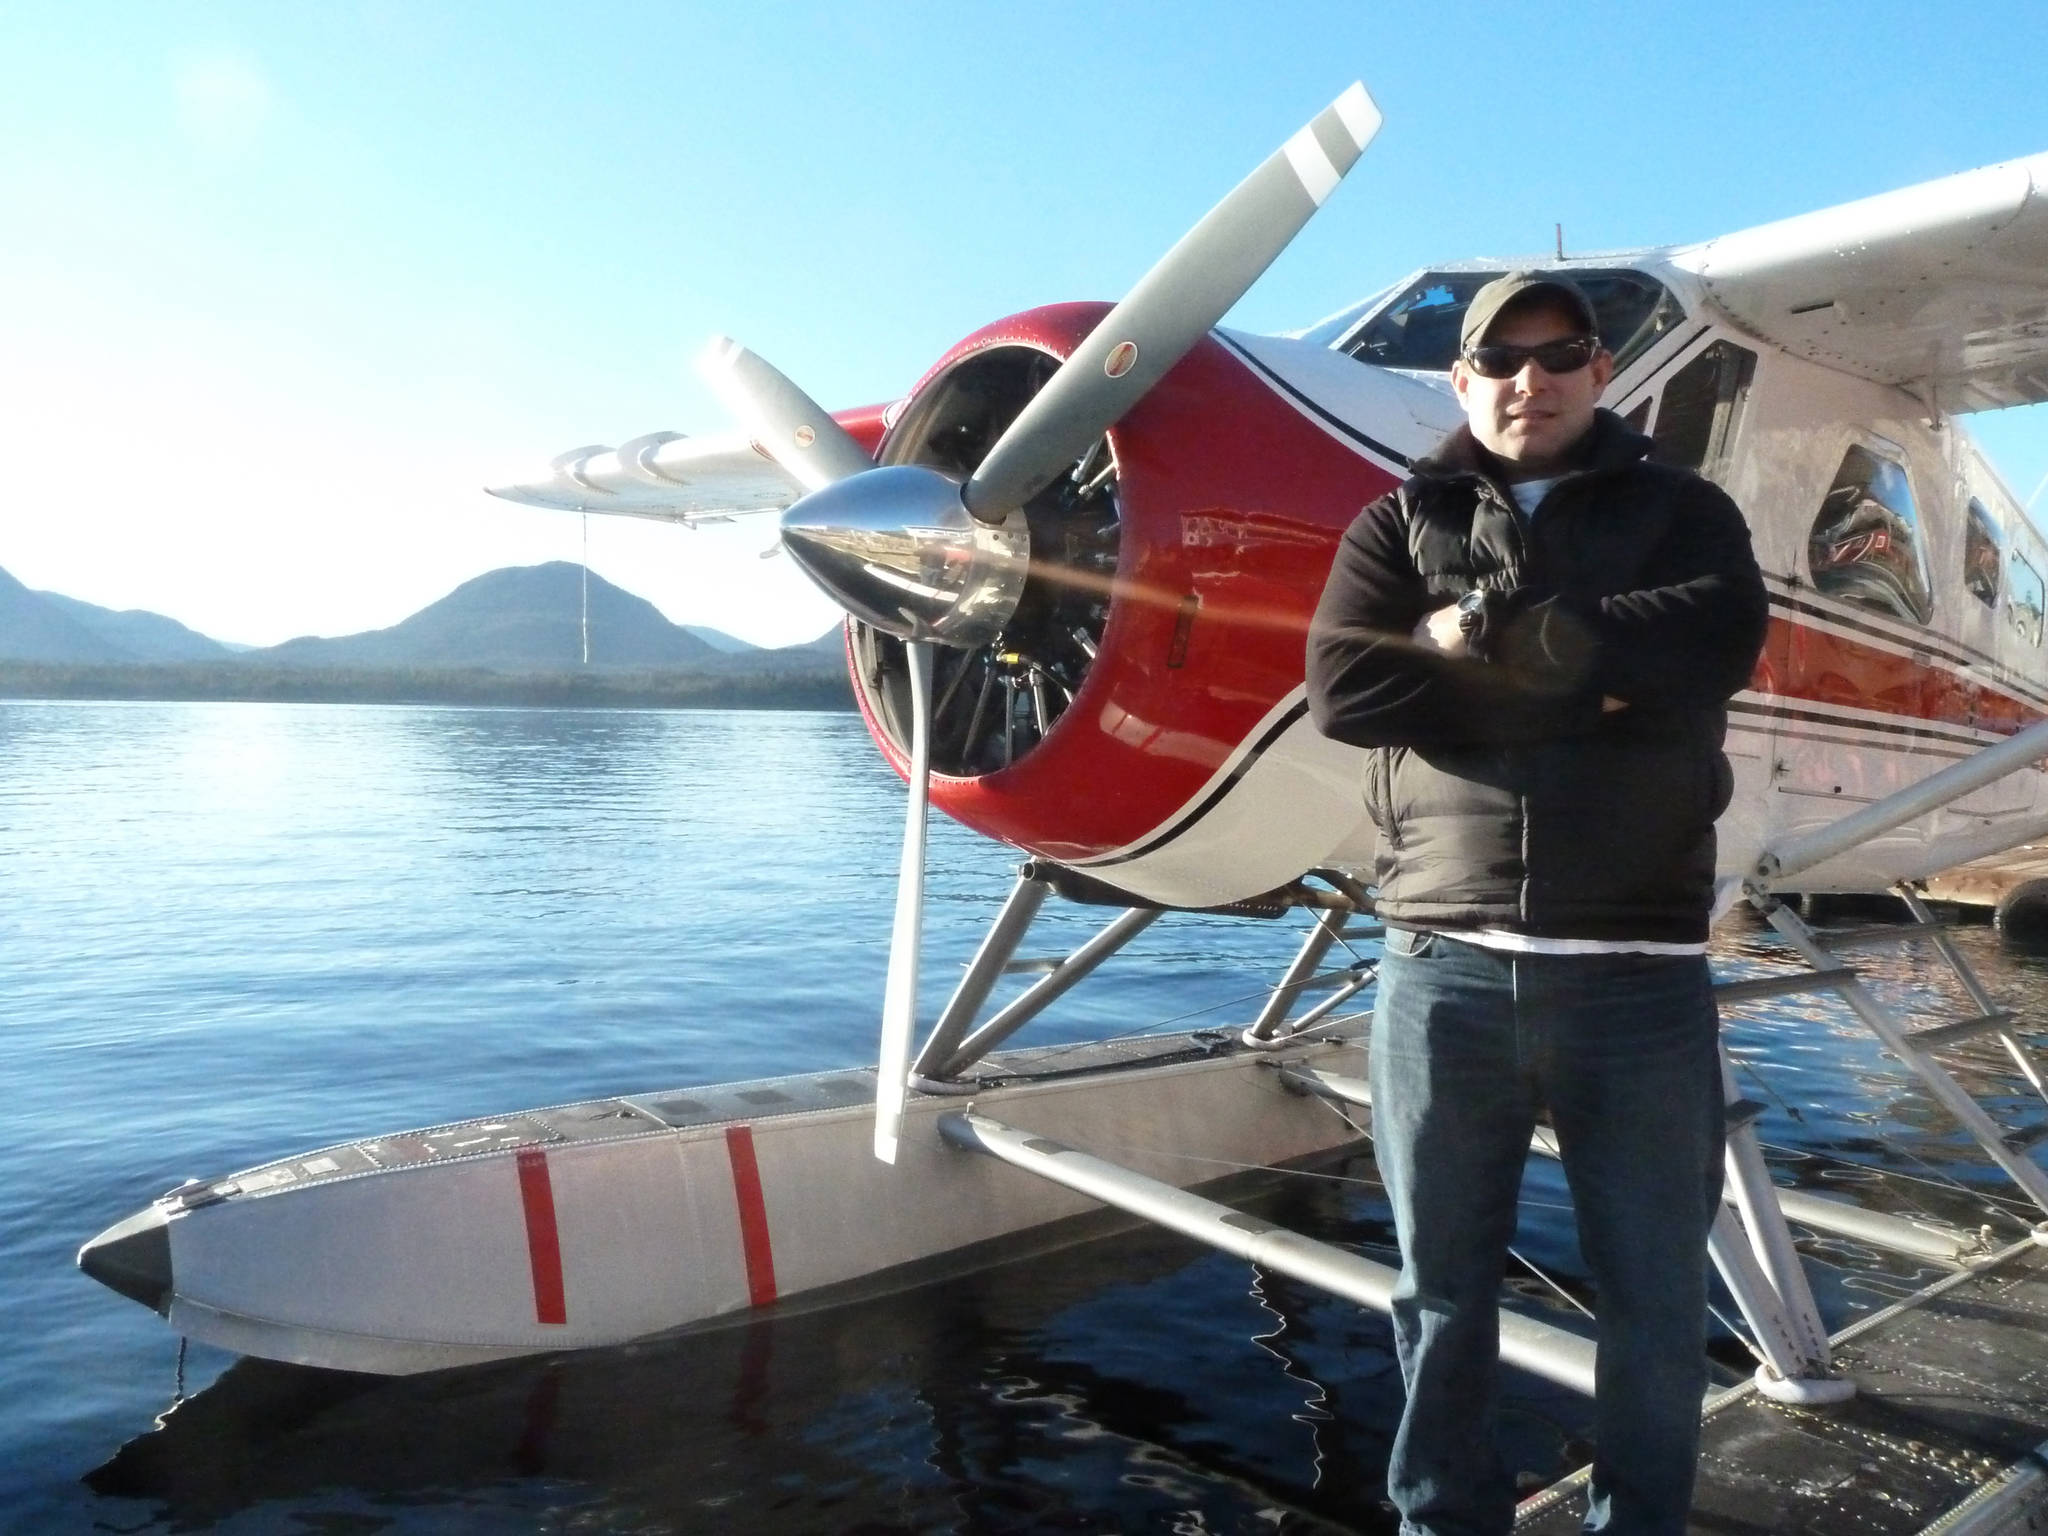 In this 2014 photo, Randy Sullivan poses for a photo in Ketchikan, Alaska. Sullivan was the pilot of one of the two sightseeing planes that crashed in midair Monday, May 13, 2019, the National Transportation Safety Board announced after a team arrived from Washington, D.C., to investigate the crash. Alaska State Troopers in a statement late Tuesday said Sullivan was killed in the crash. (James Glionna/Los Angeles Times via AP)